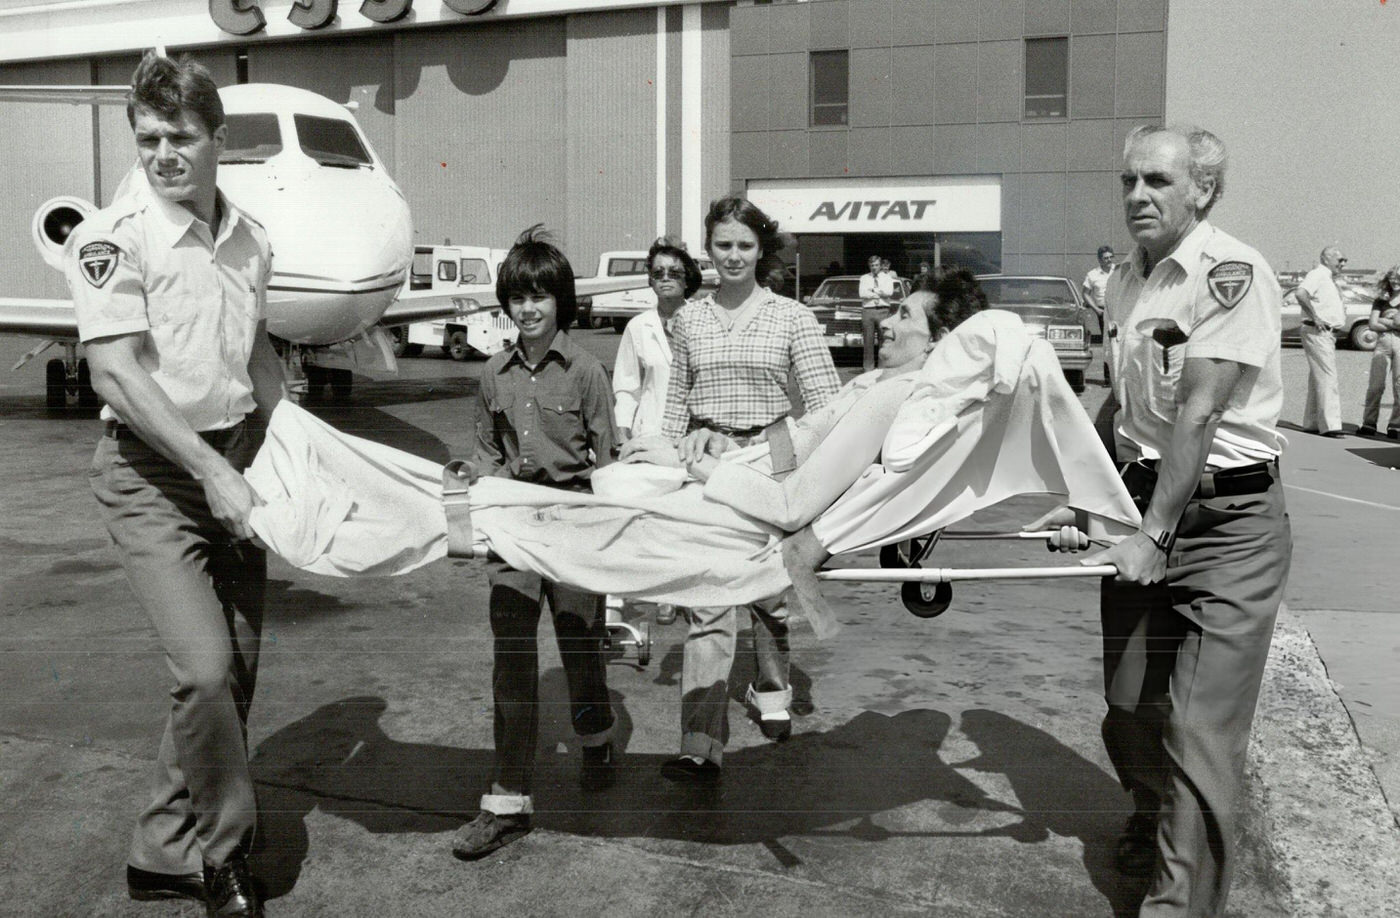 Scarborough mother Shirey Chappell is carried to an air ambulance, 1980s.